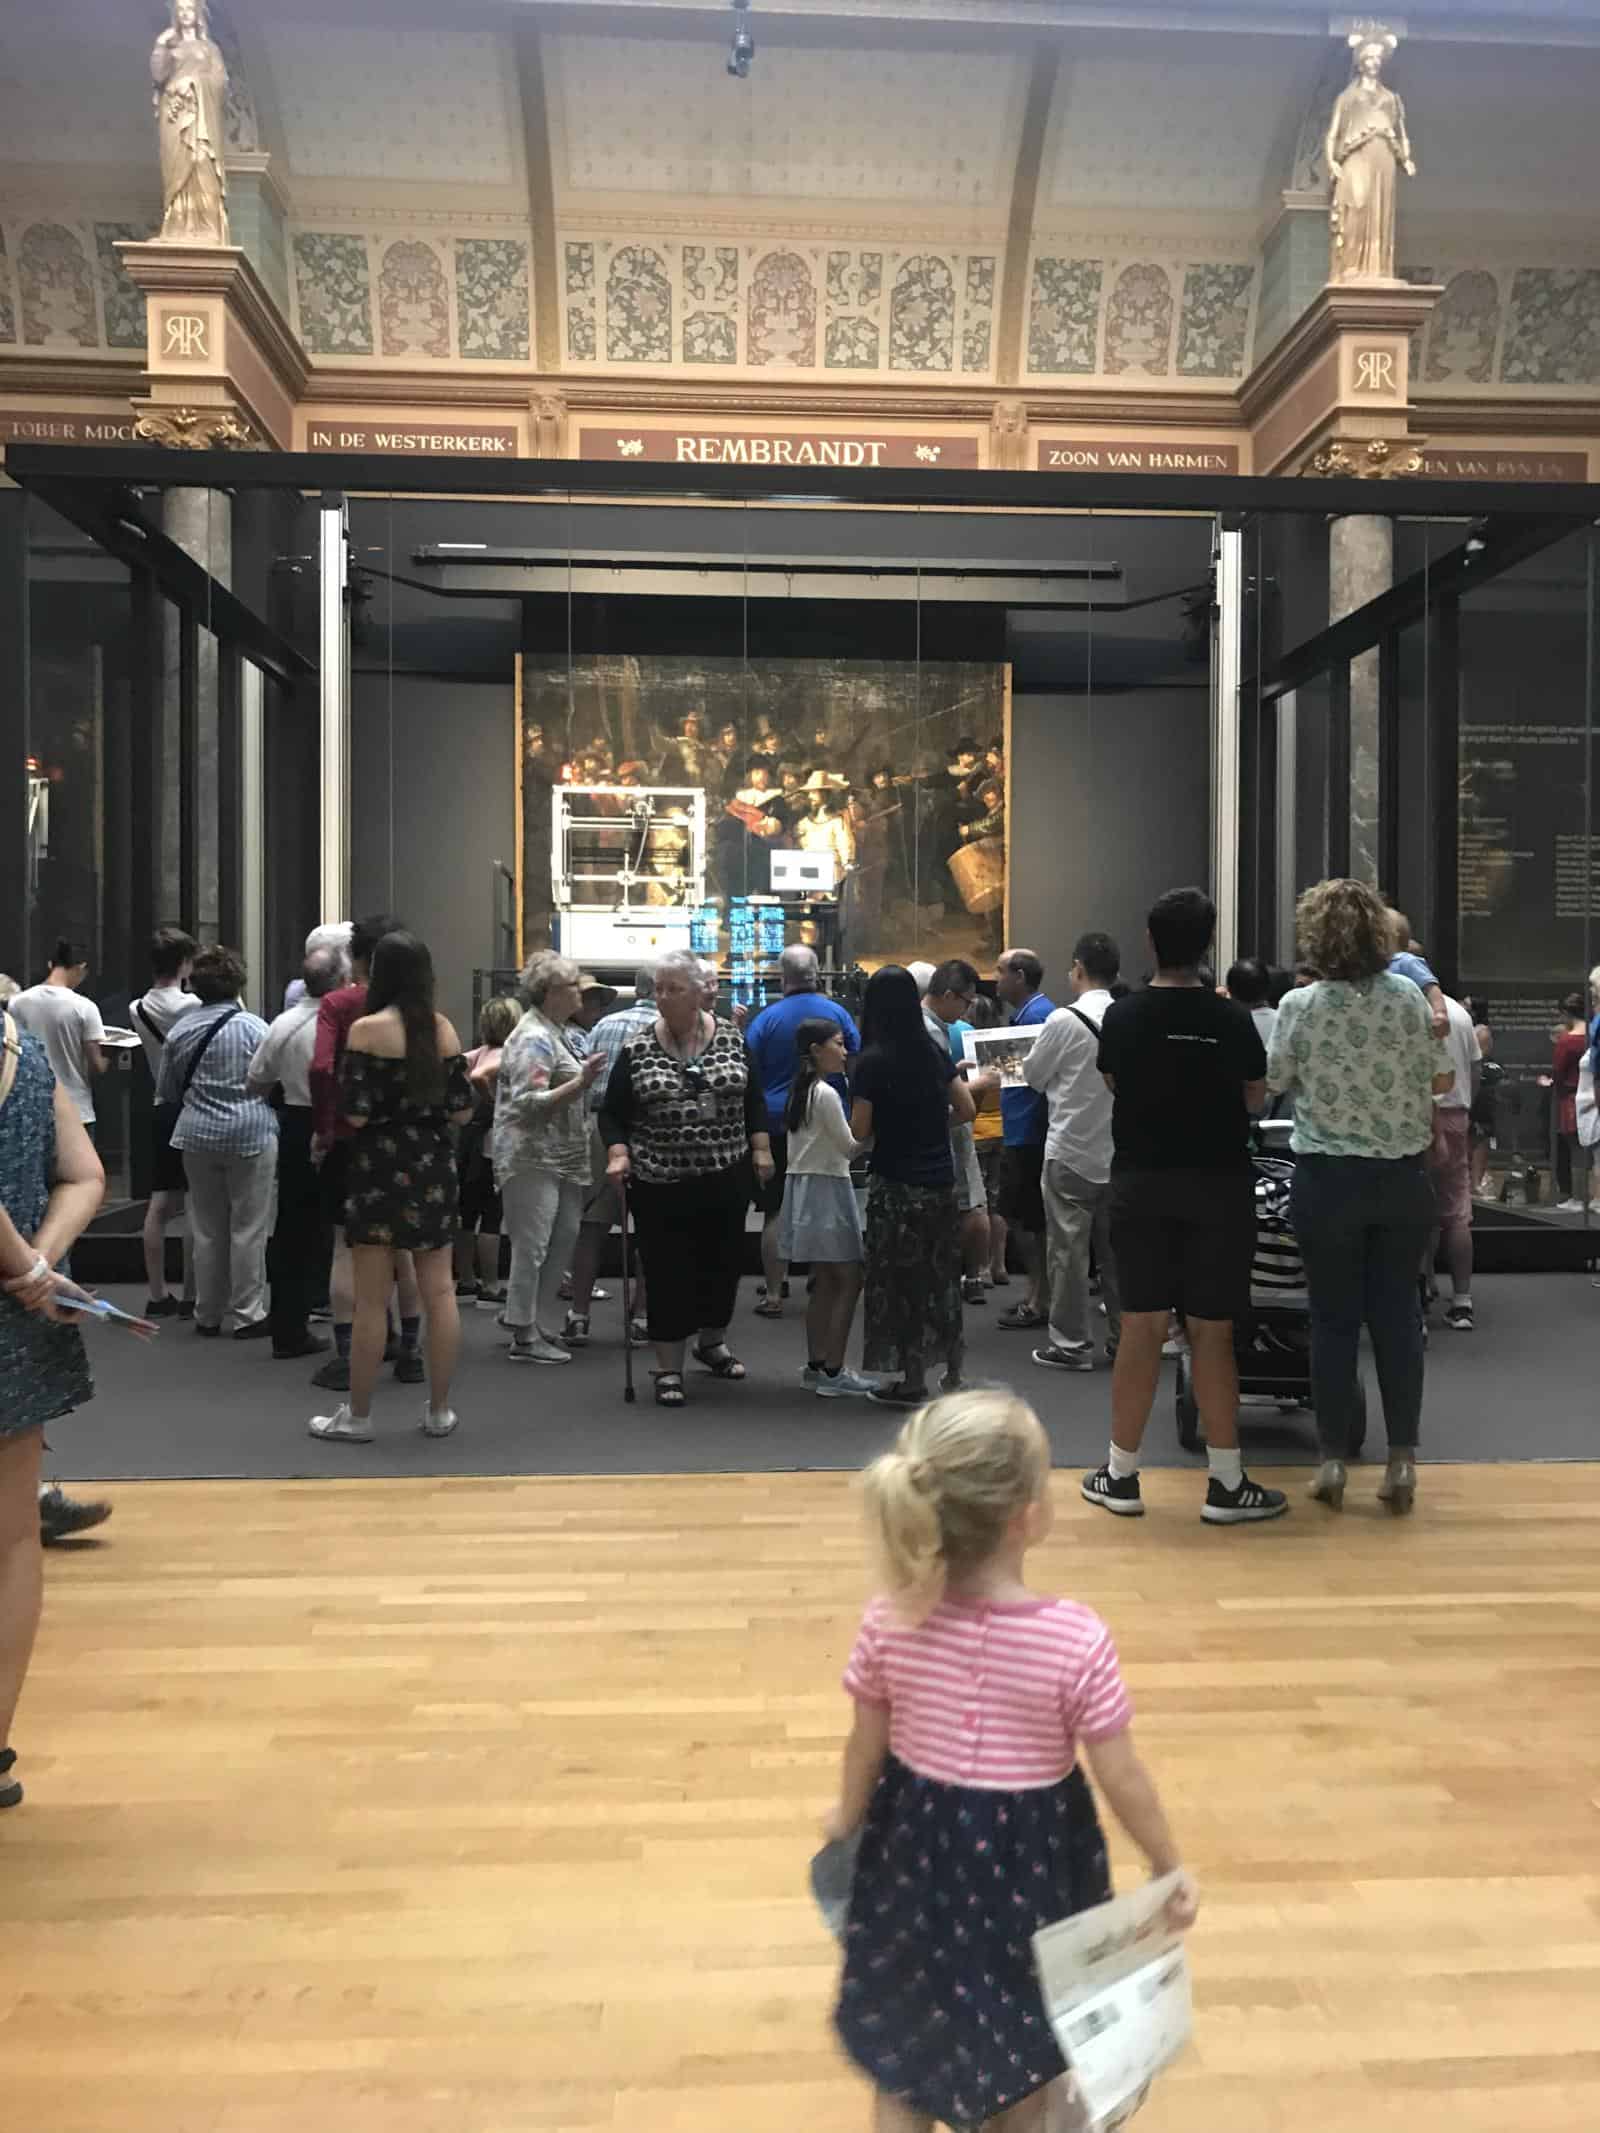 Visiting the Rijksmuseum with kids including Rijksmuseum highlights